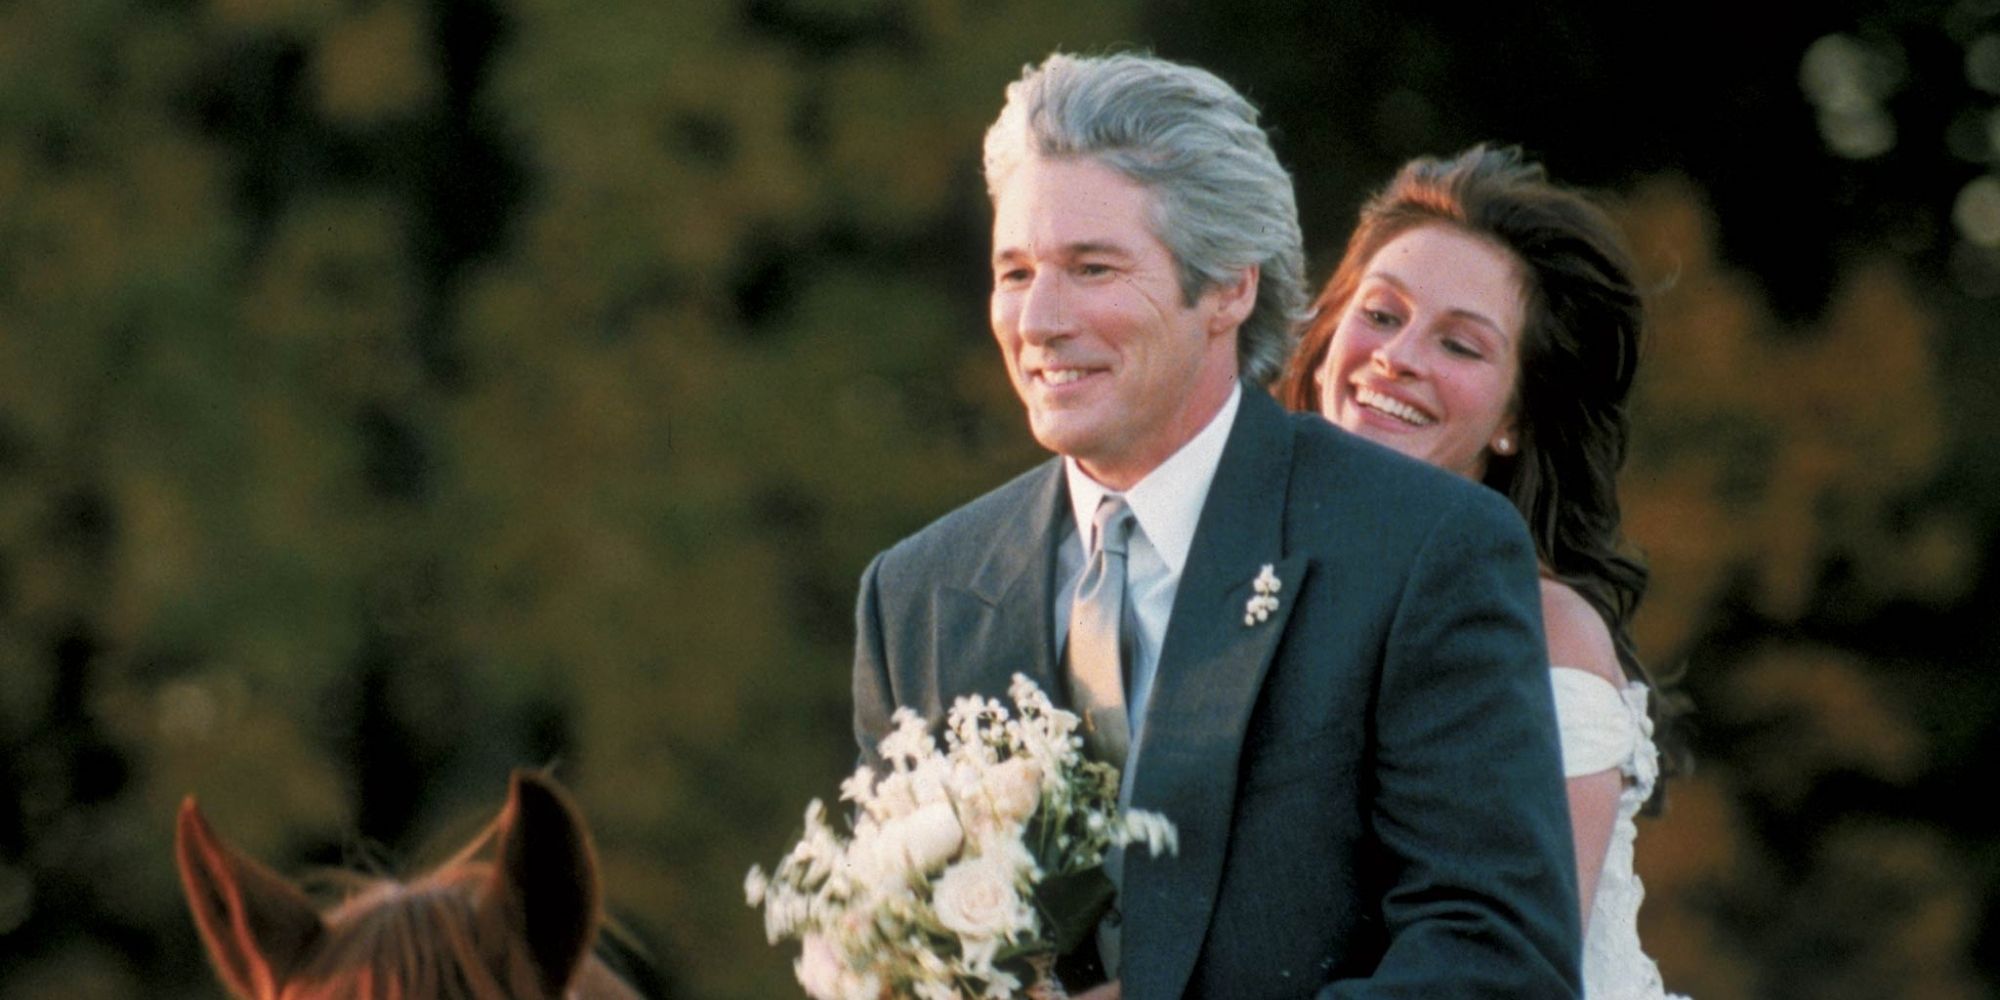 Ike (Richard Gere) and Maggie (Julia Roberts) riding a horse in Runaway Bride 